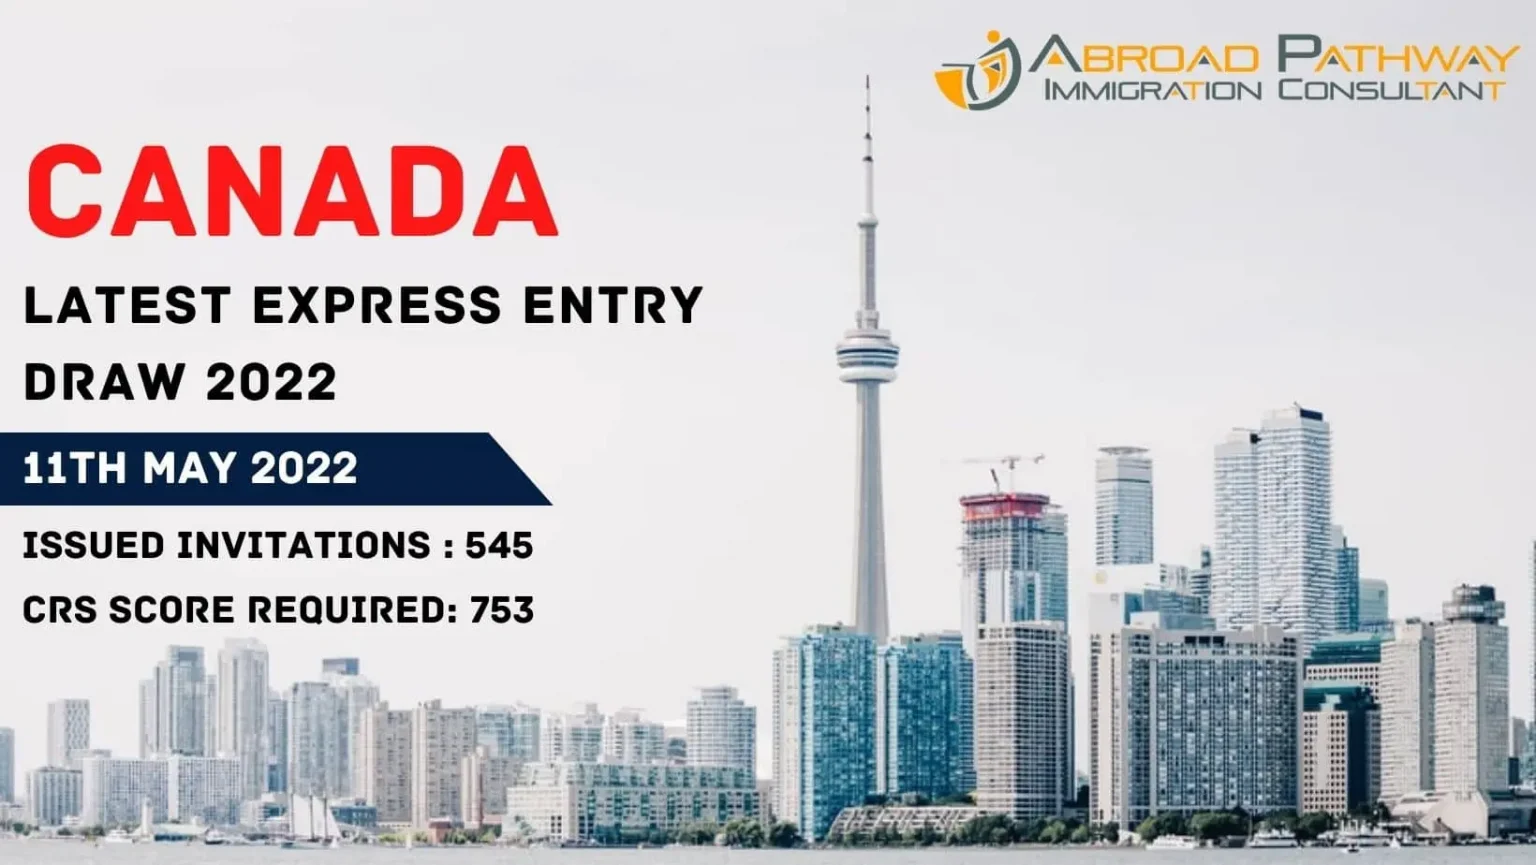 Canada Express Entry Draw invites 545 PNP candidates